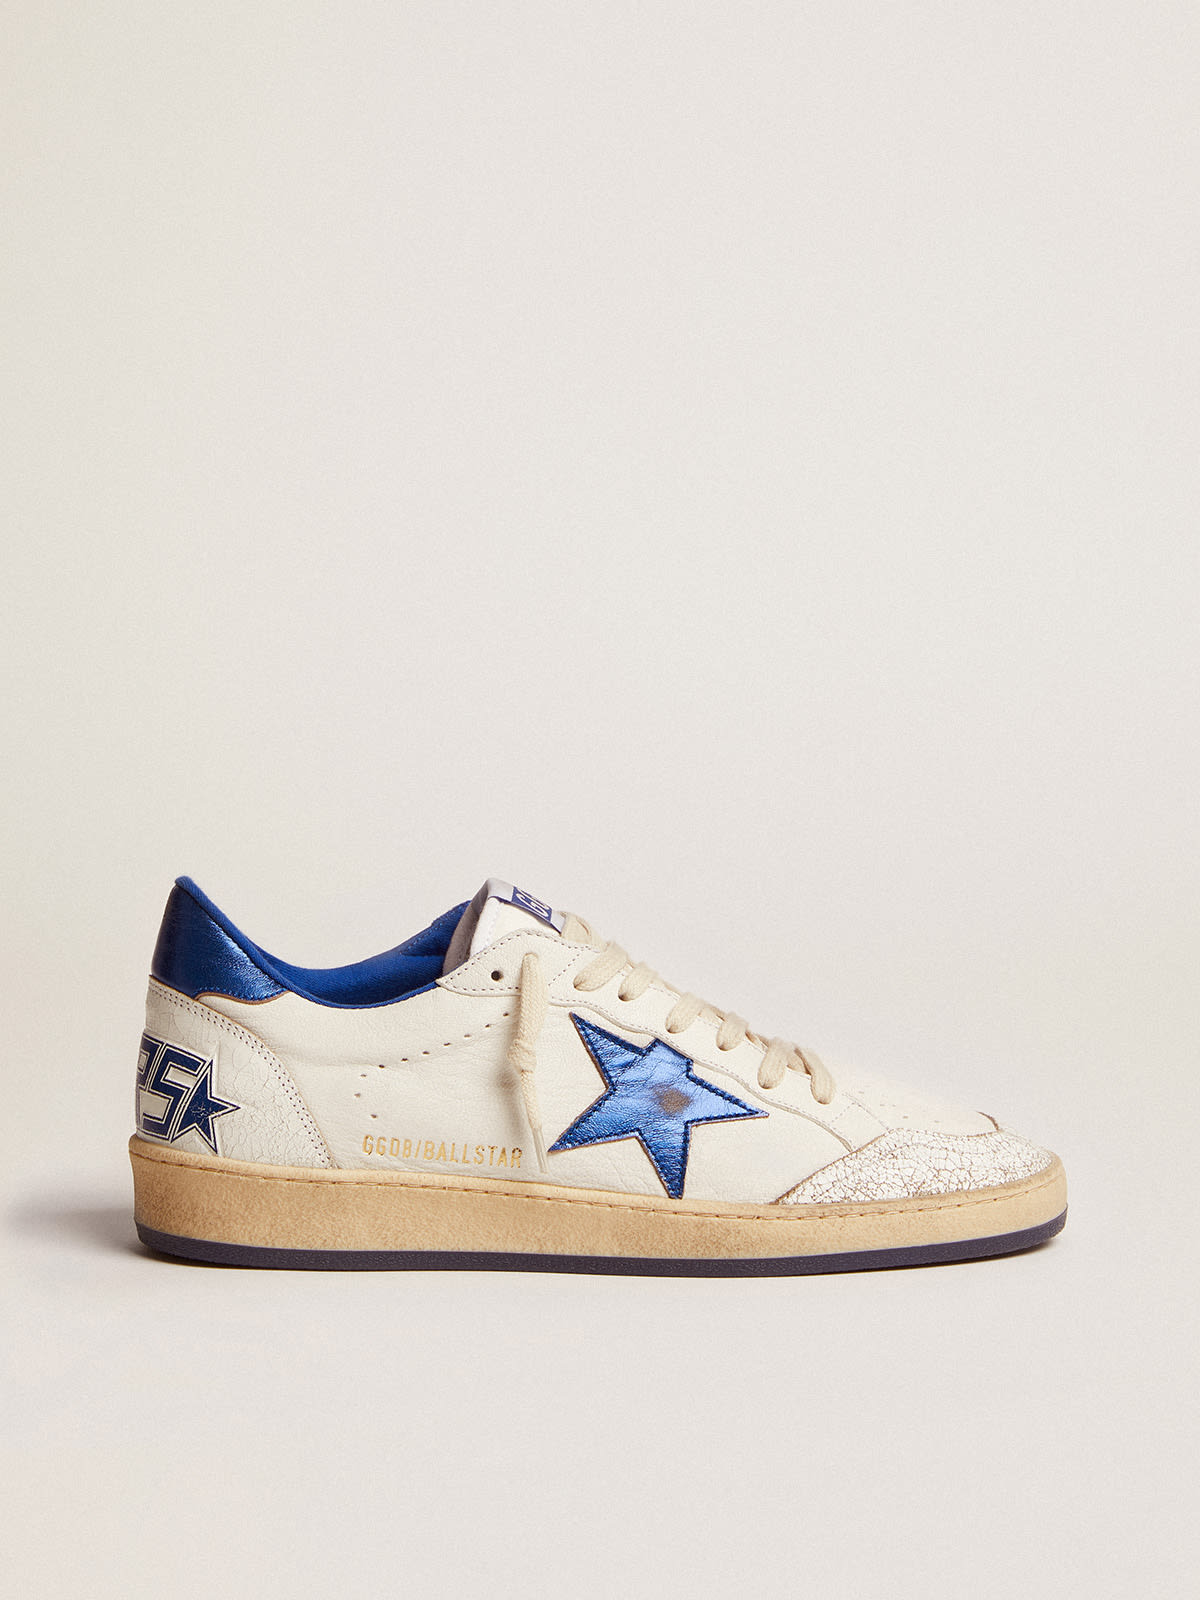 indsats Klappe leksikon Ball Star sneakers in white nappa leather with light blue laminated leather  star and heel tab | Golden Goose